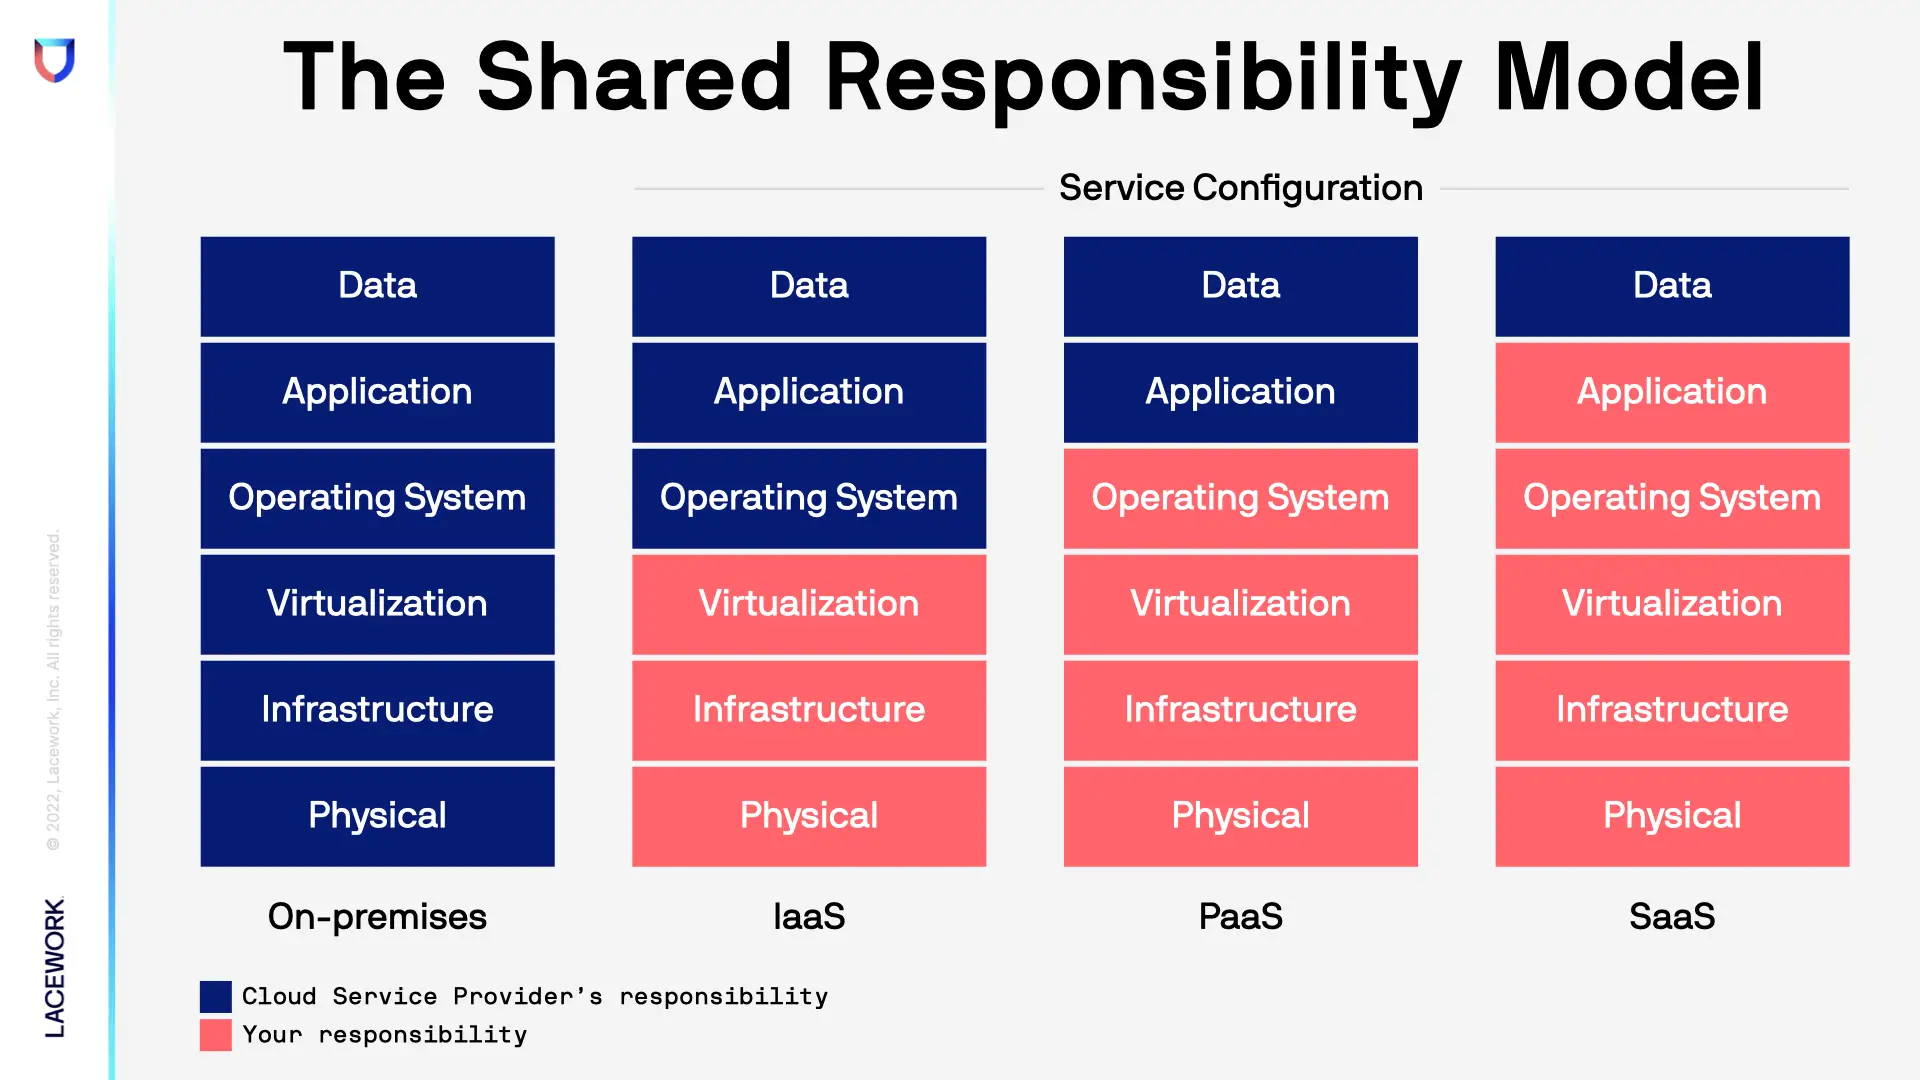 The Shared Responsibility Model